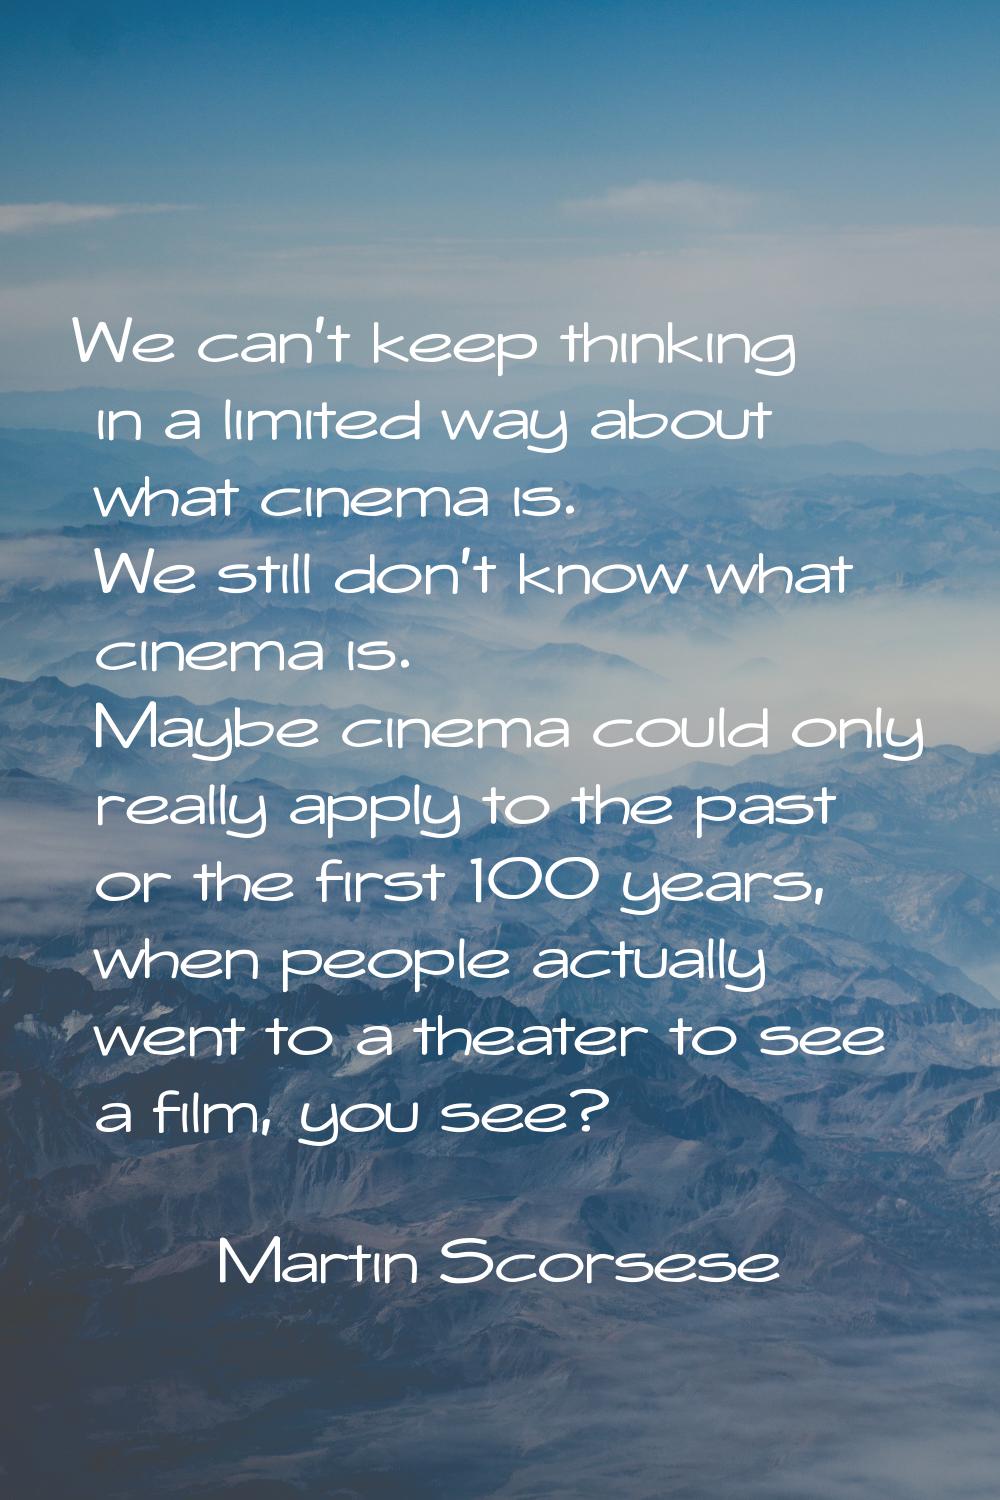 We can't keep thinking in a limited way about what cinema is. We still don't know what cinema is. M